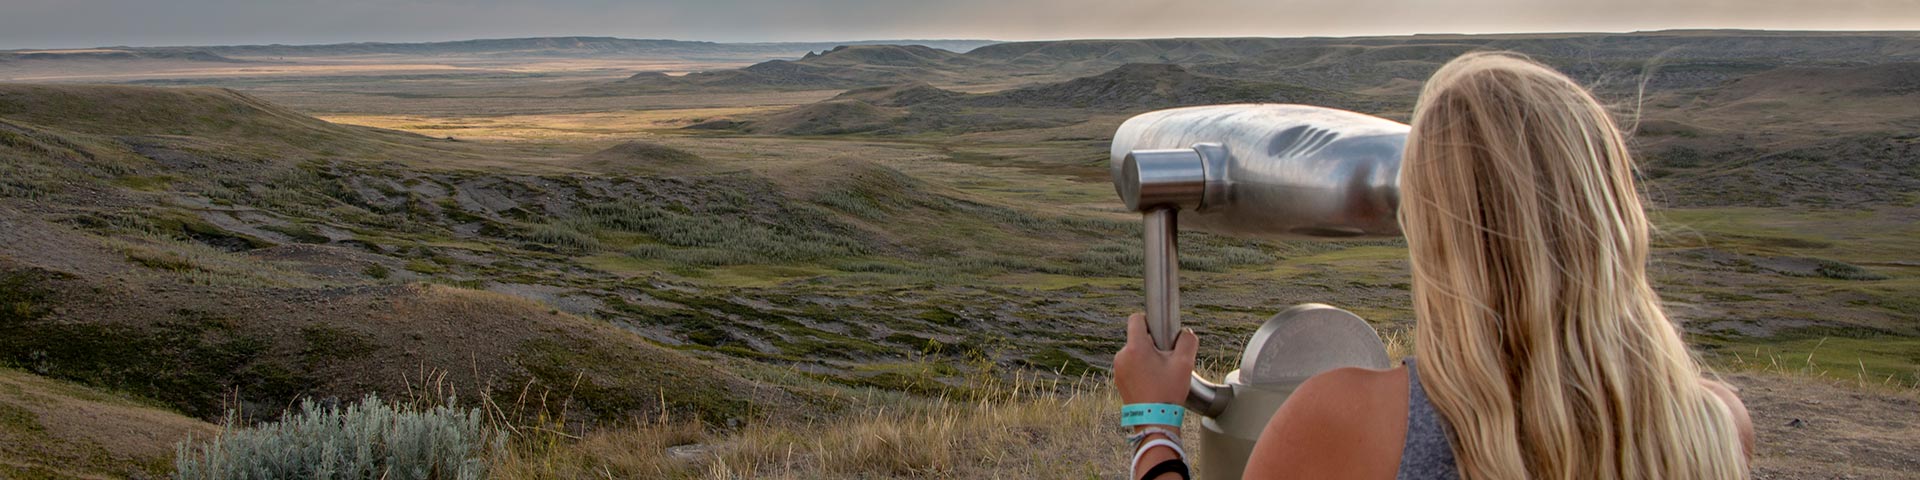 A woman checking out the landscape through a viewing scope in the West Block of Grasslands National Park.